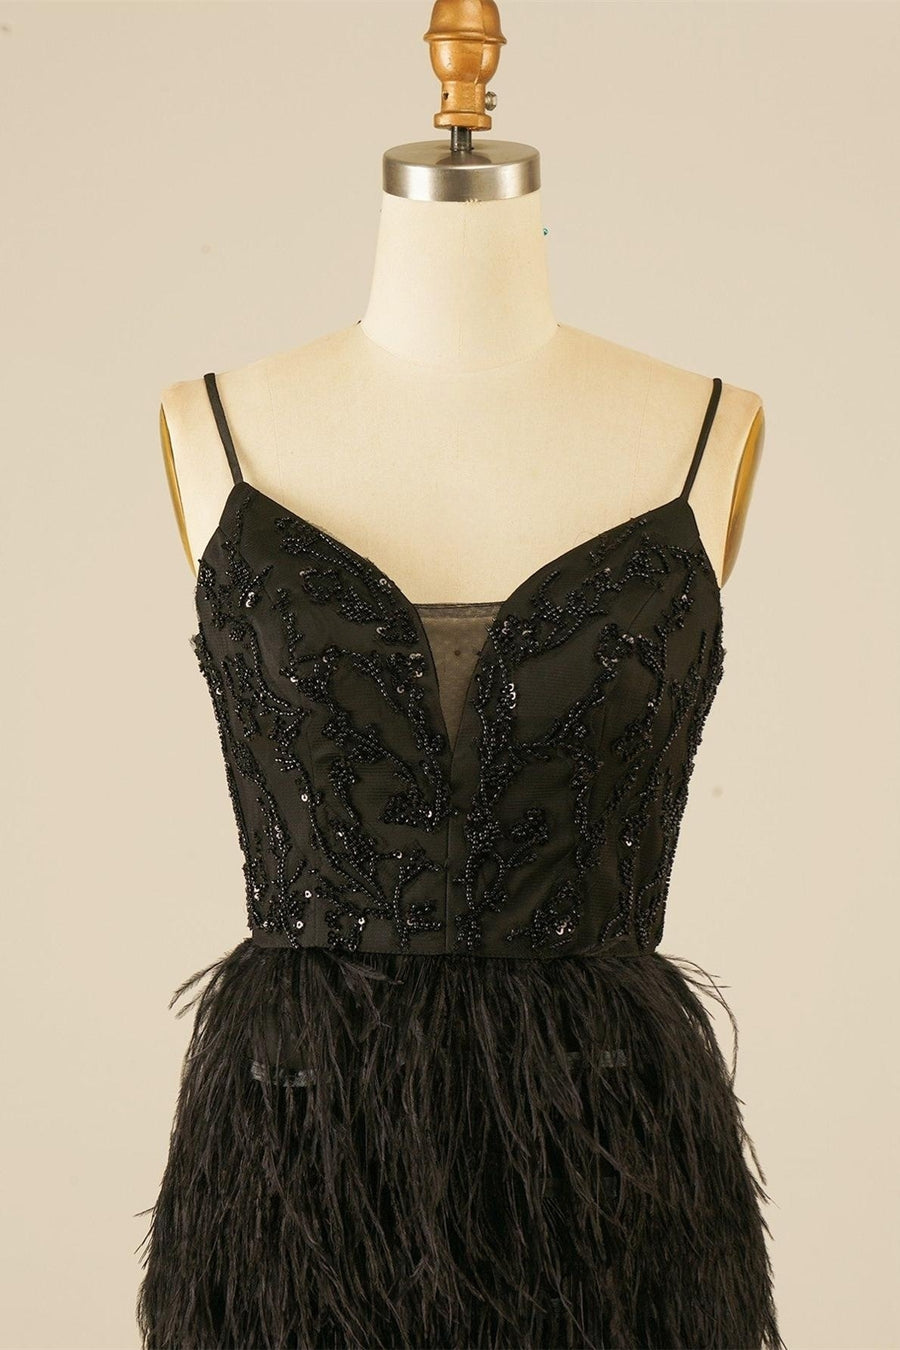 Black Plunging V Neck beading-embroidered Homecoming Dress with Feathers